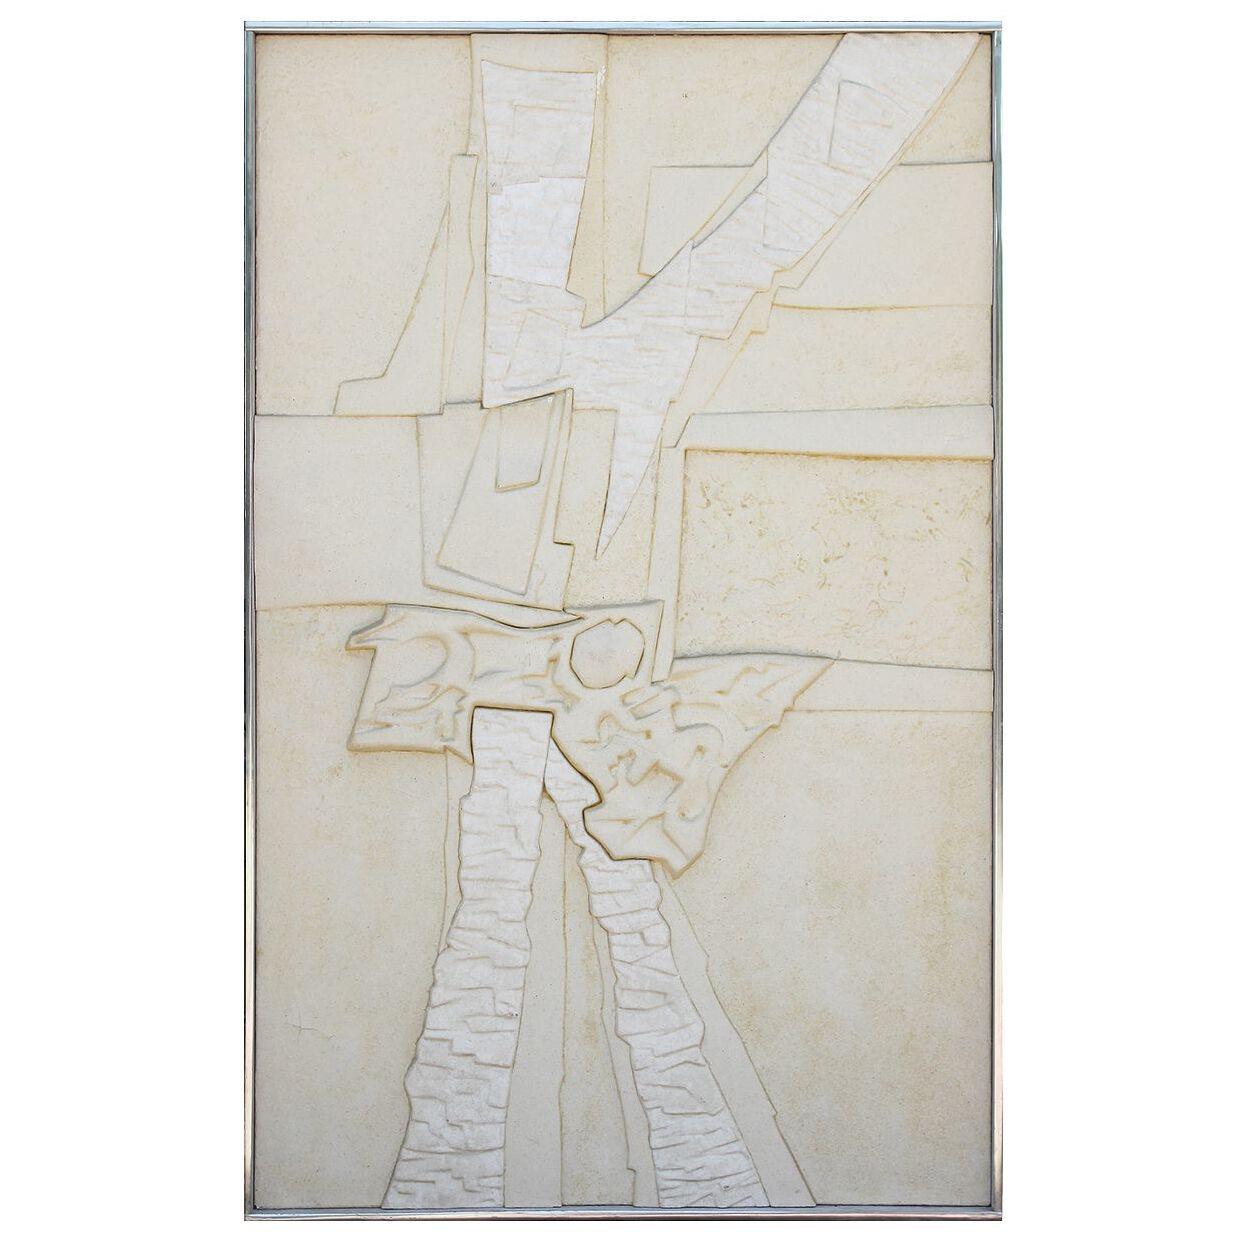 "Polyurethane Relief #16" White Abstract Geometric Sculptural Relief Painting